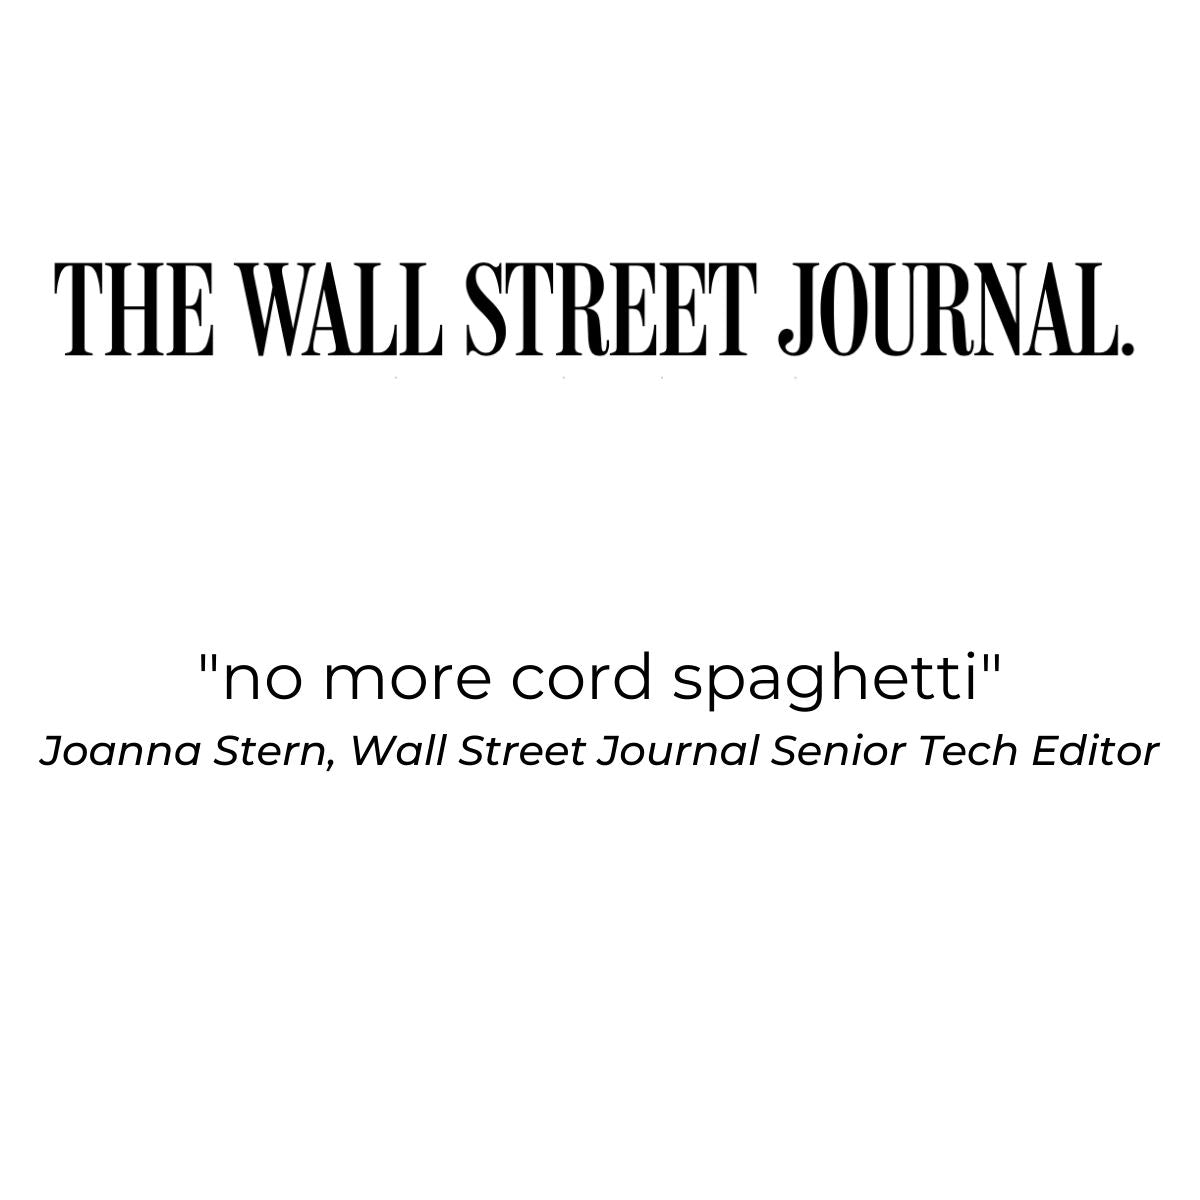 Wall Street Journal Quote for Cable Blocks.  "no more cord spaghetti." Joanna Stern Wall Street Journal Senior Tech Editor